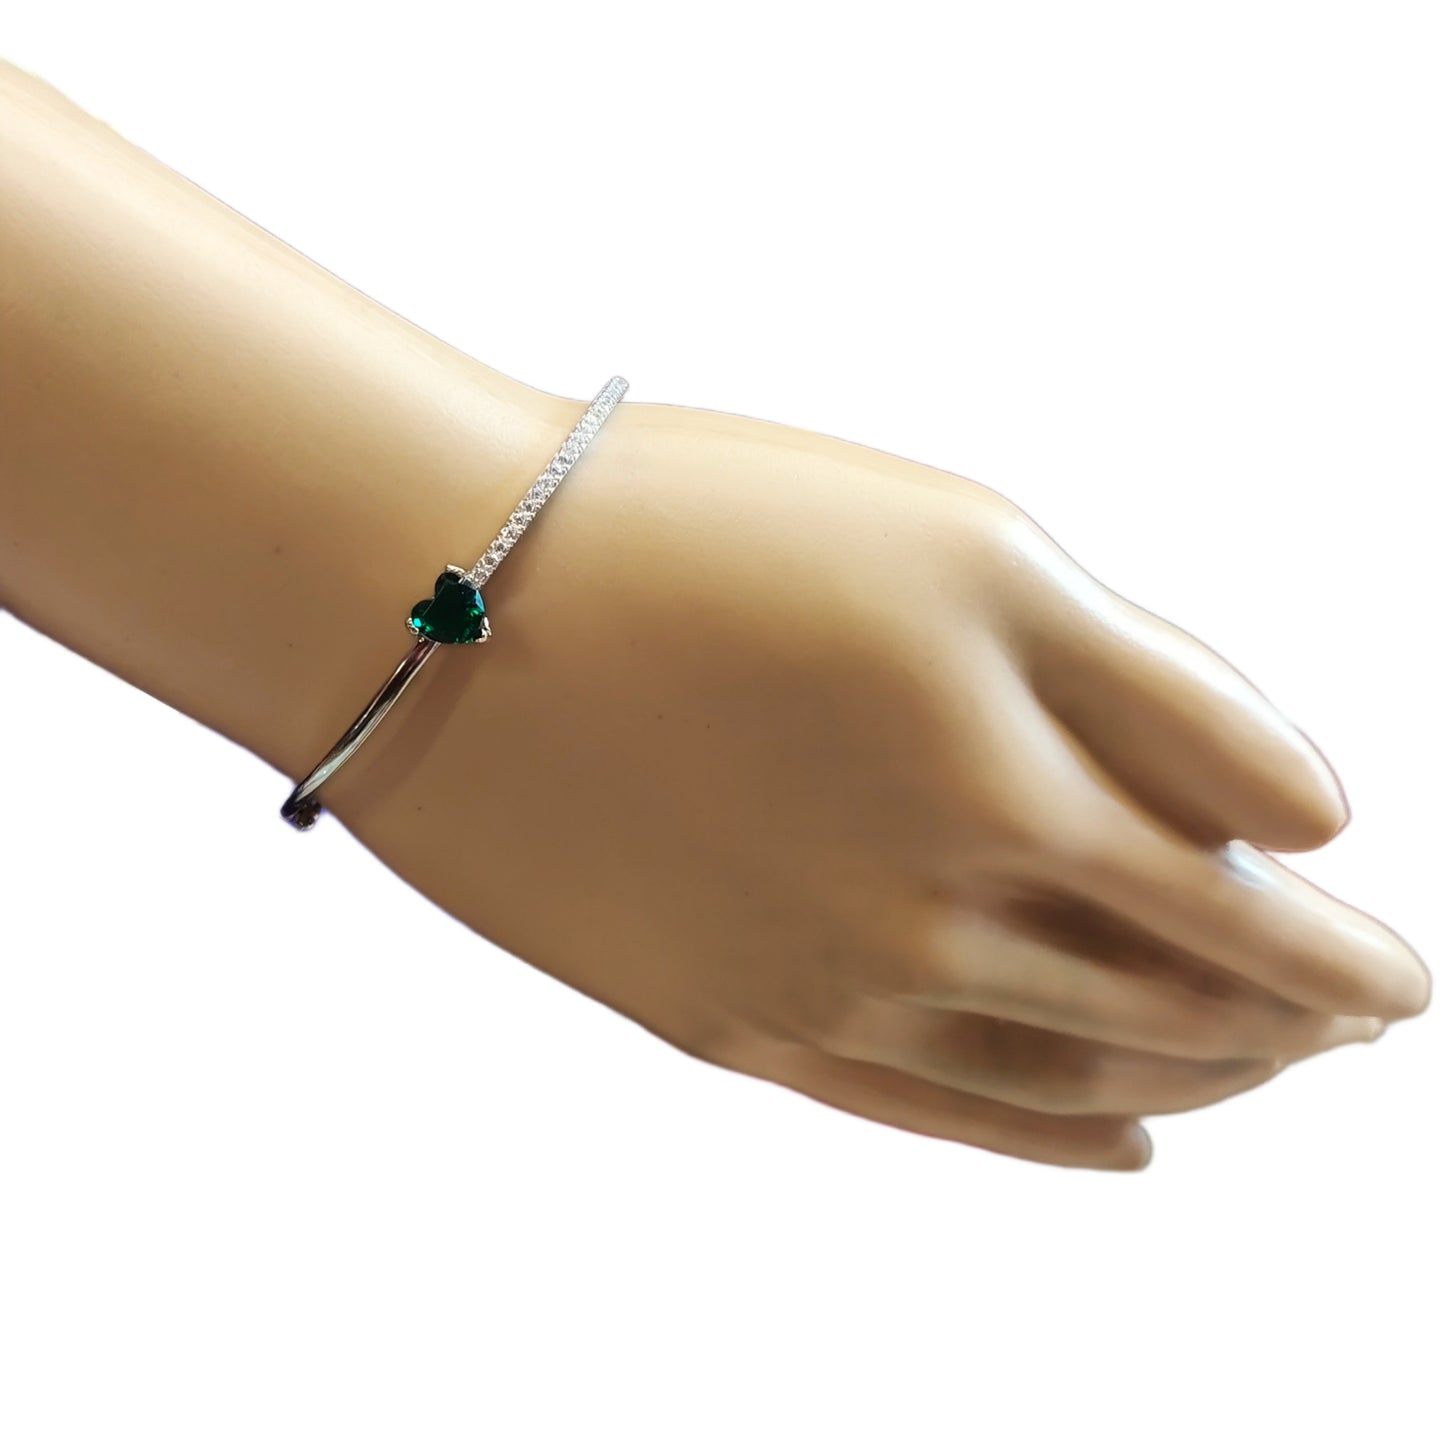 "Graceful Elegance: Adorning Her Wrist with the 925 Silver Bracelet by Asp Fashion Jewellery"